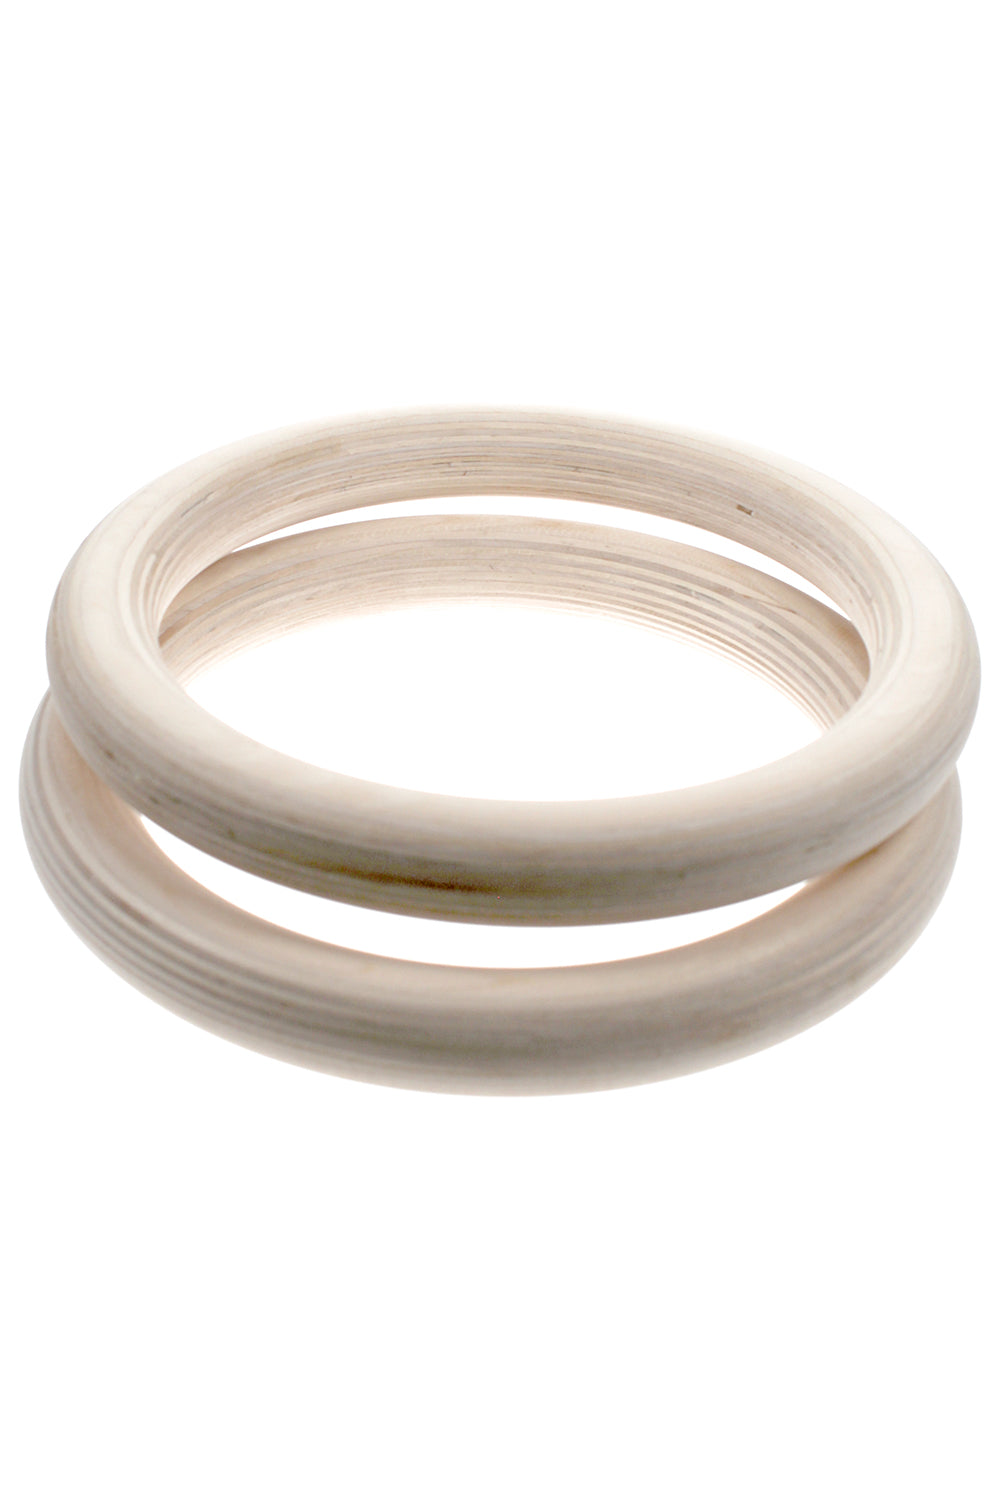 Sundried Wooden Gymnastic Rings - Gymrings Gym Accessories SDGYMRINGS Activewear